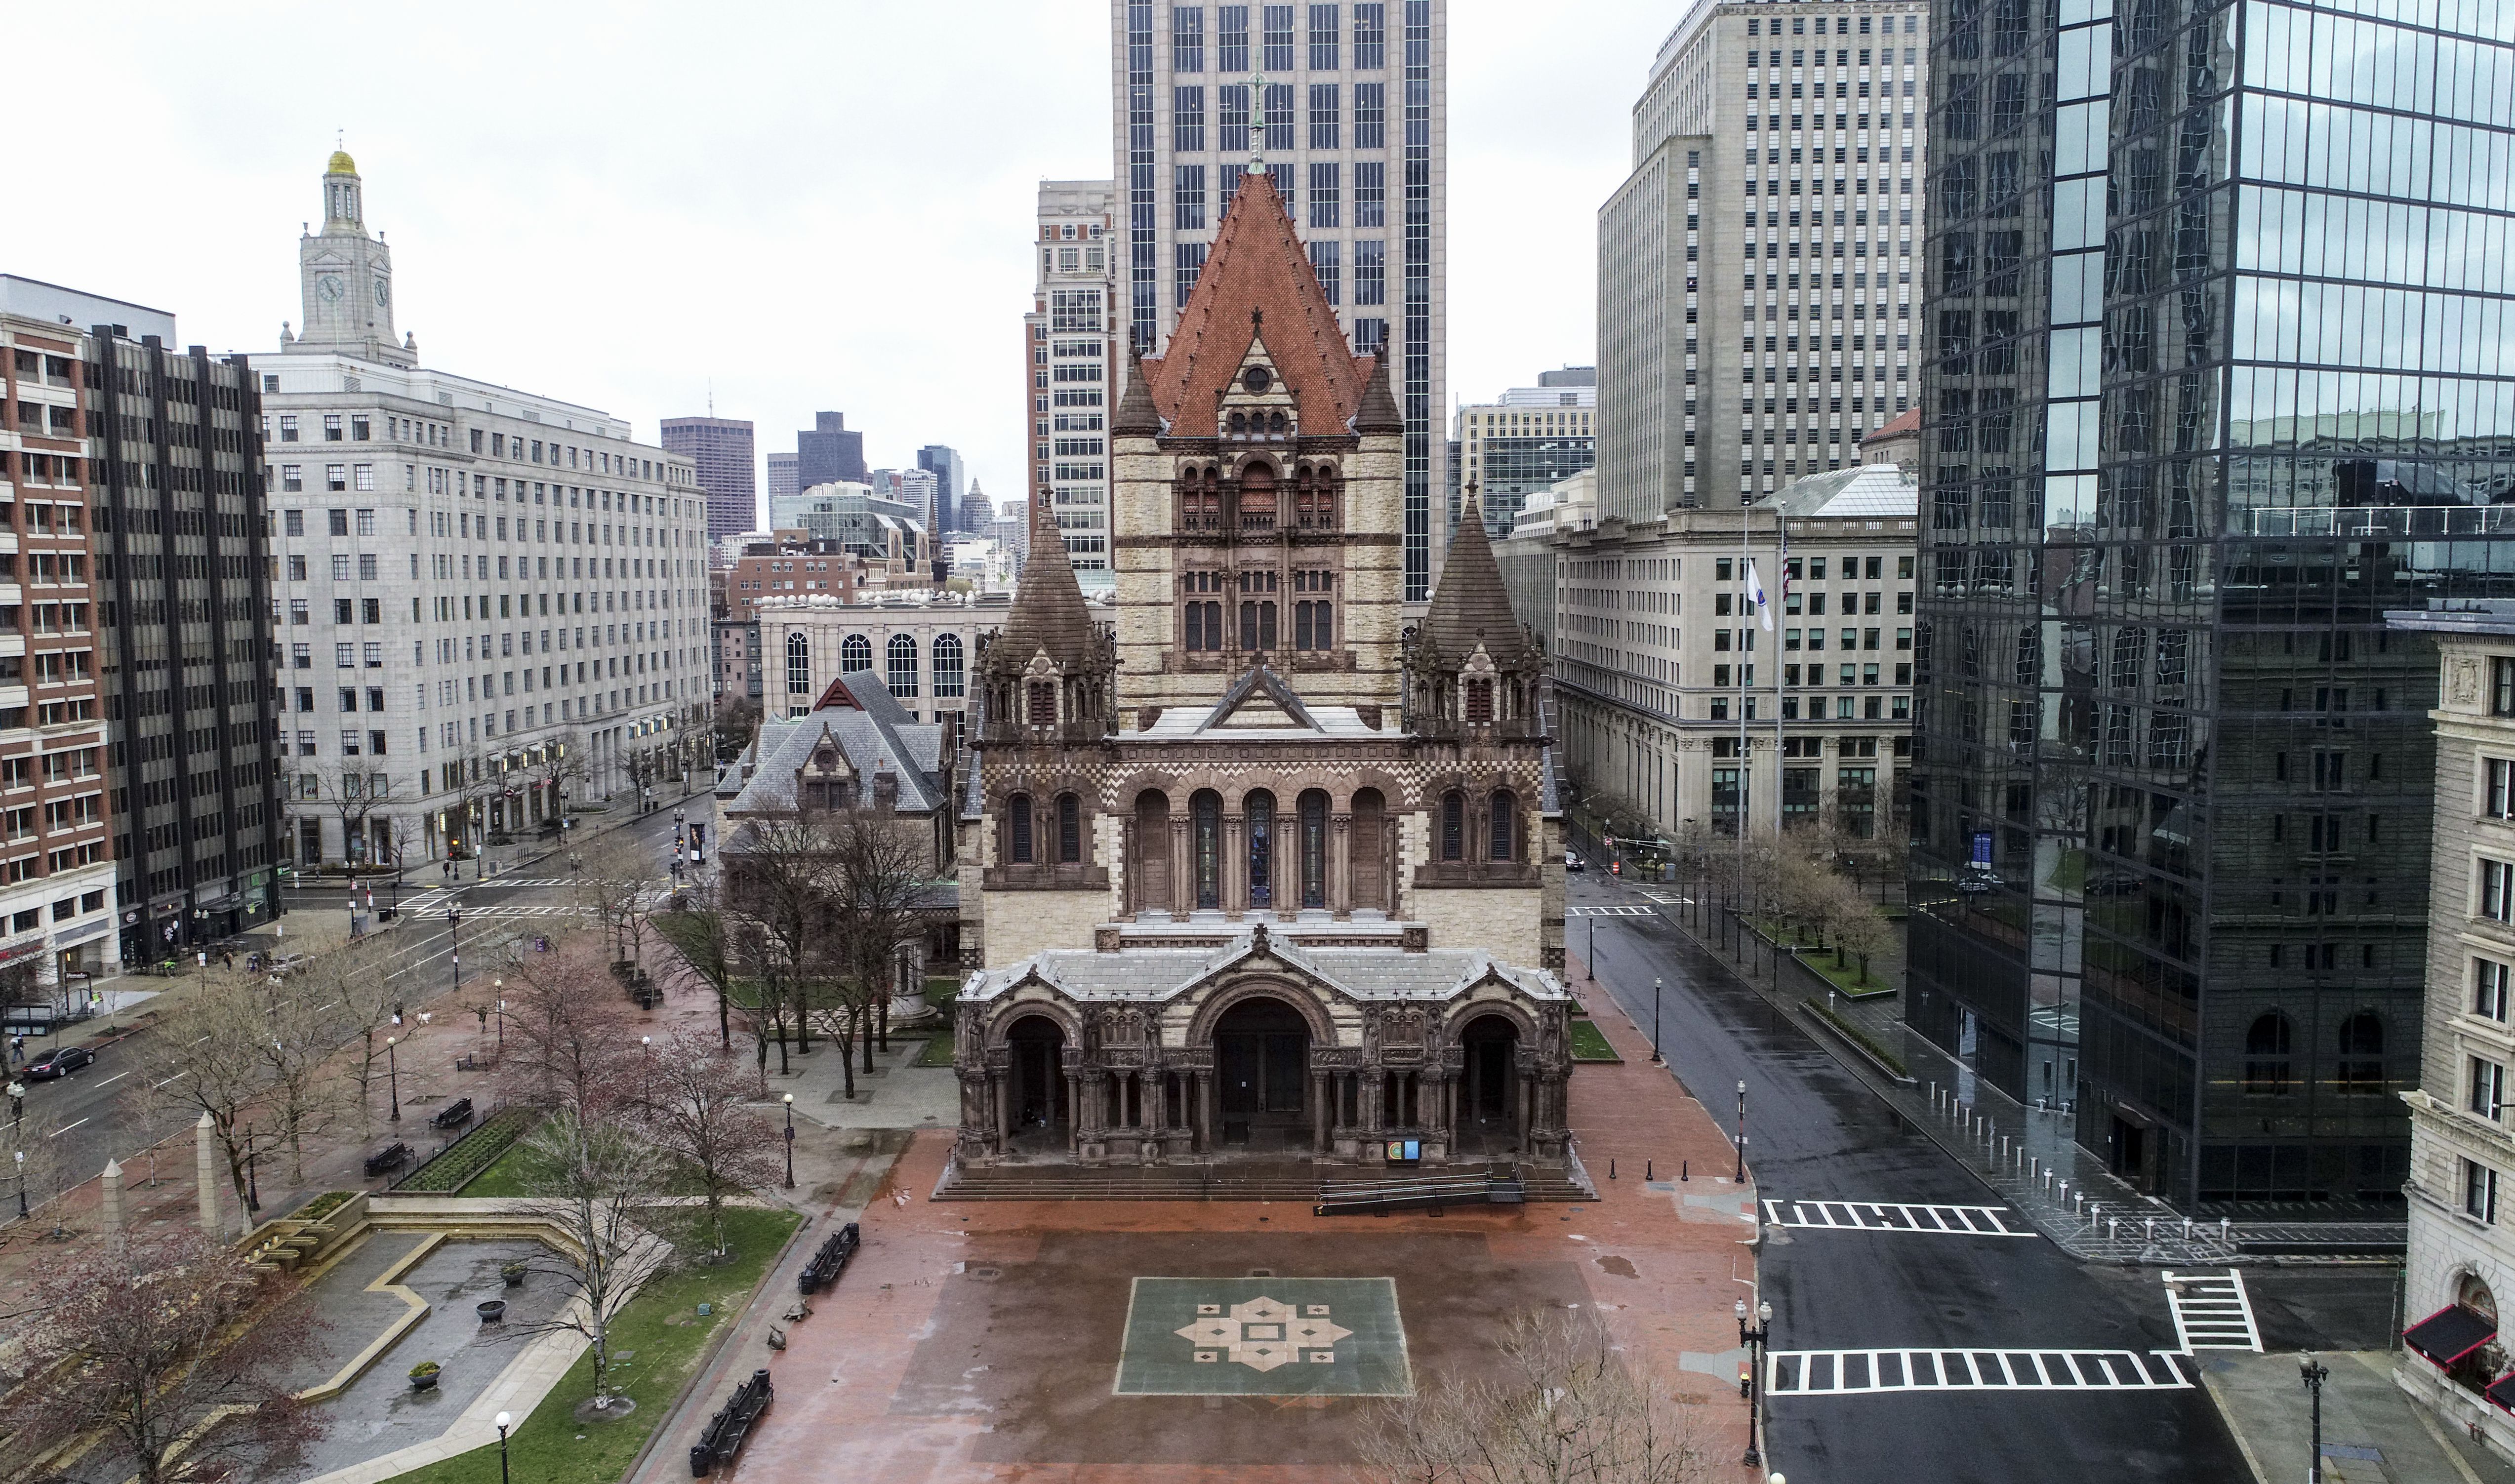 City of Boston is working with architectural firm to rethink